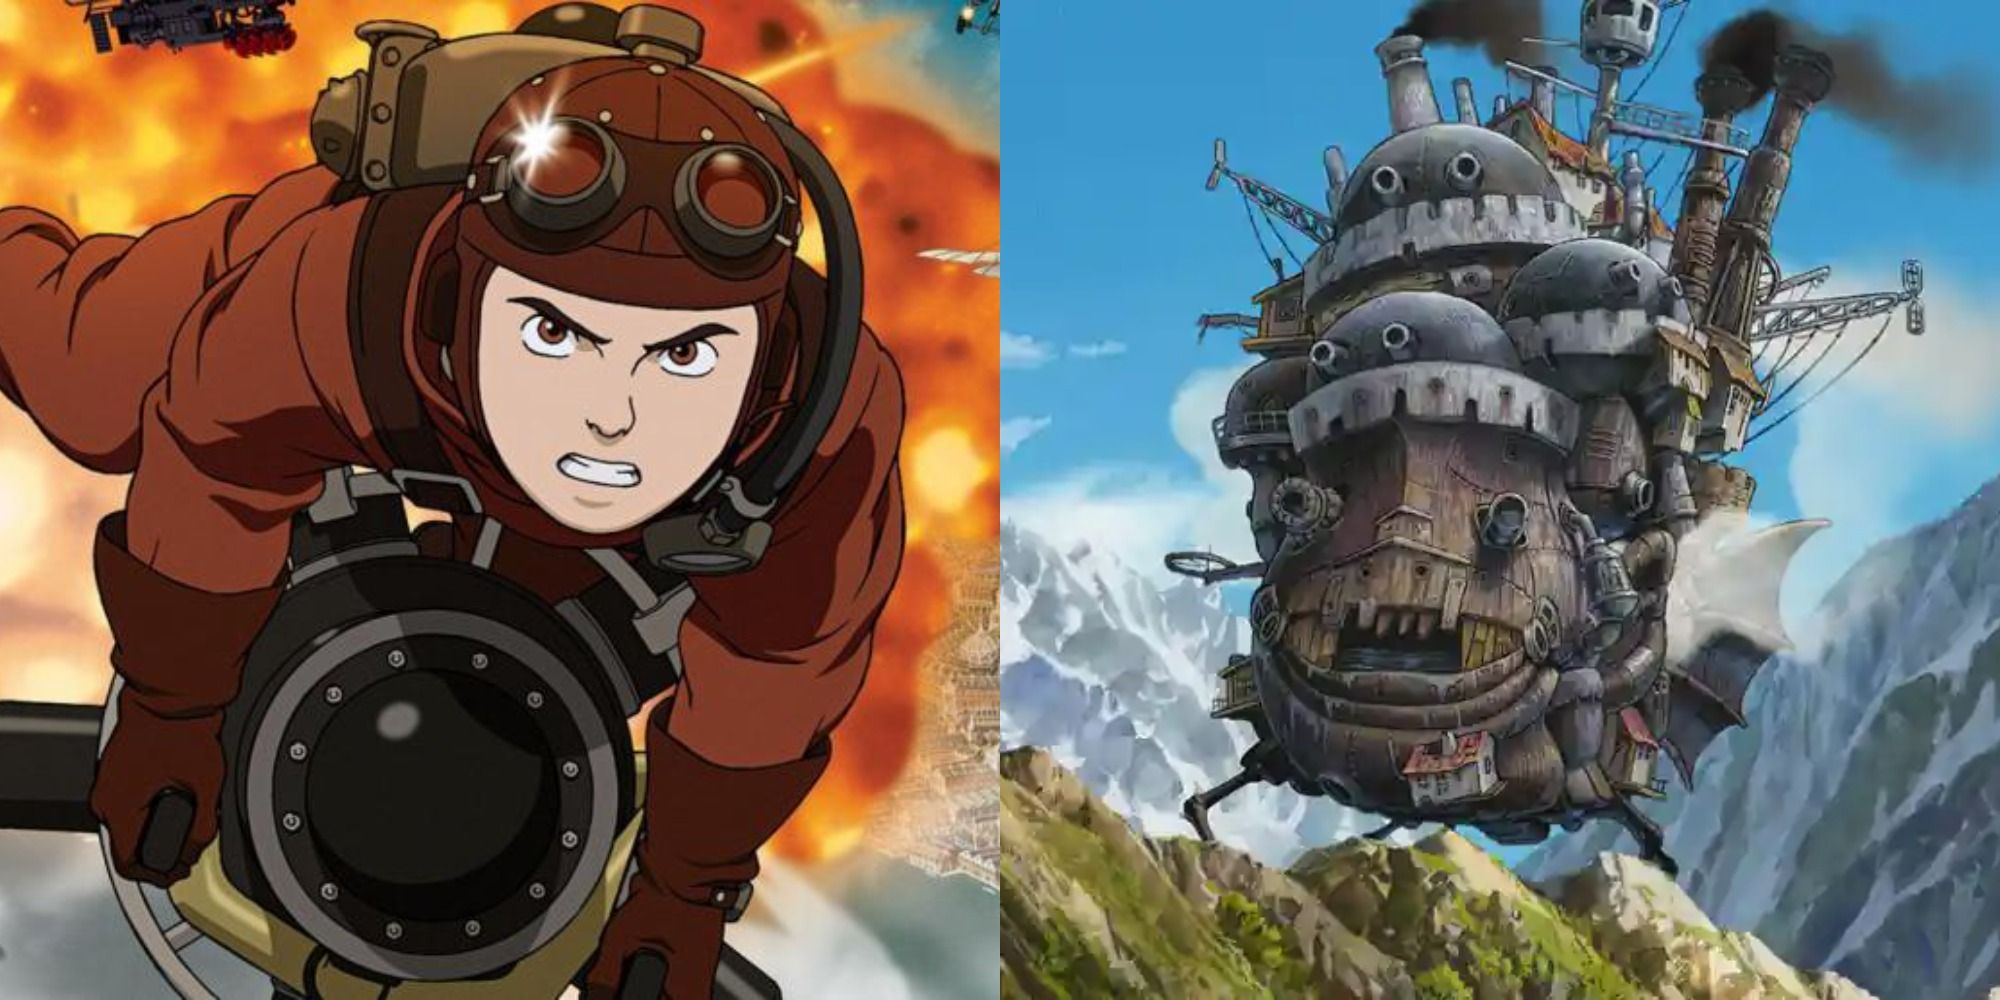 Steam In Steamboy And The Castle From Howls Moving Castle 